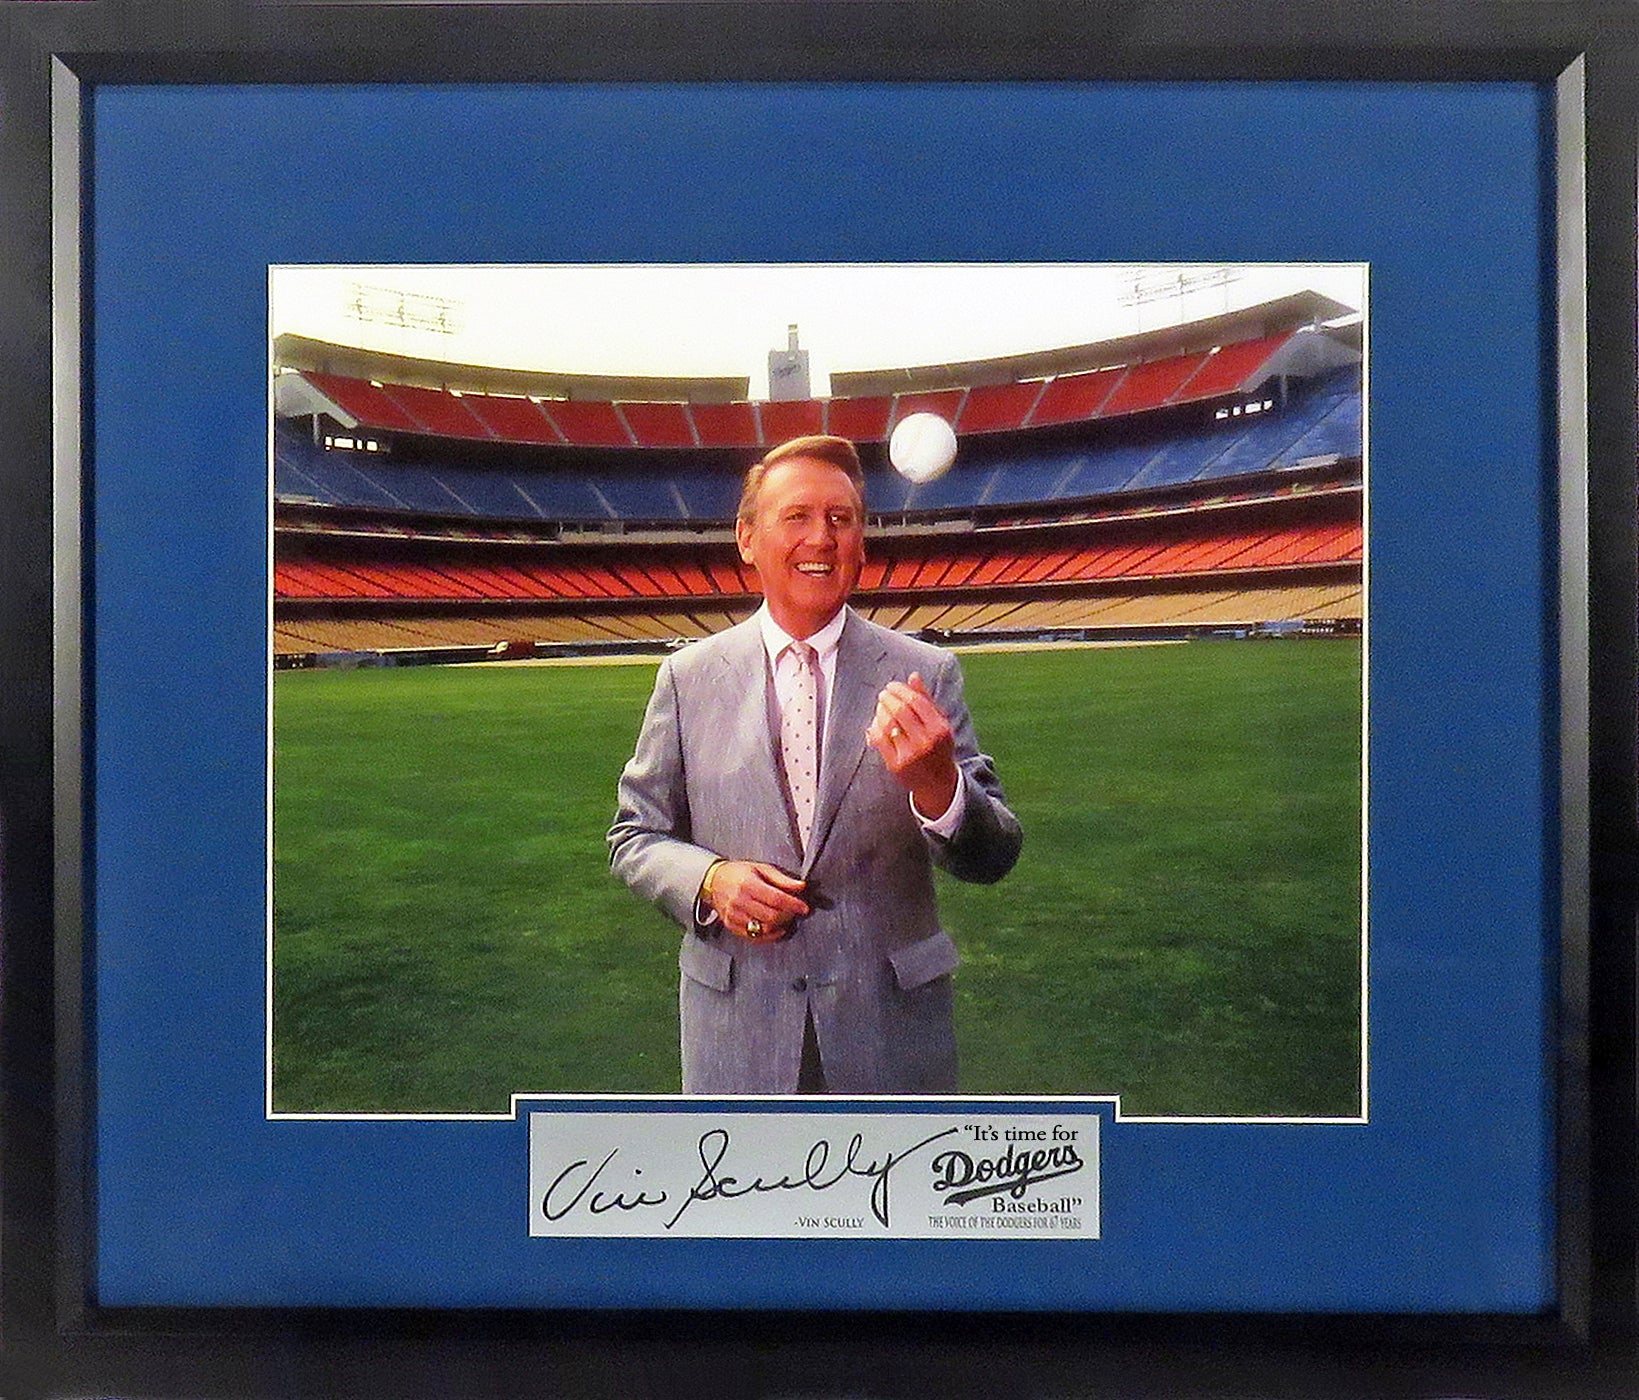 Los Angeles Dodgers Vin Scully 11x14 Framed Photograph Display